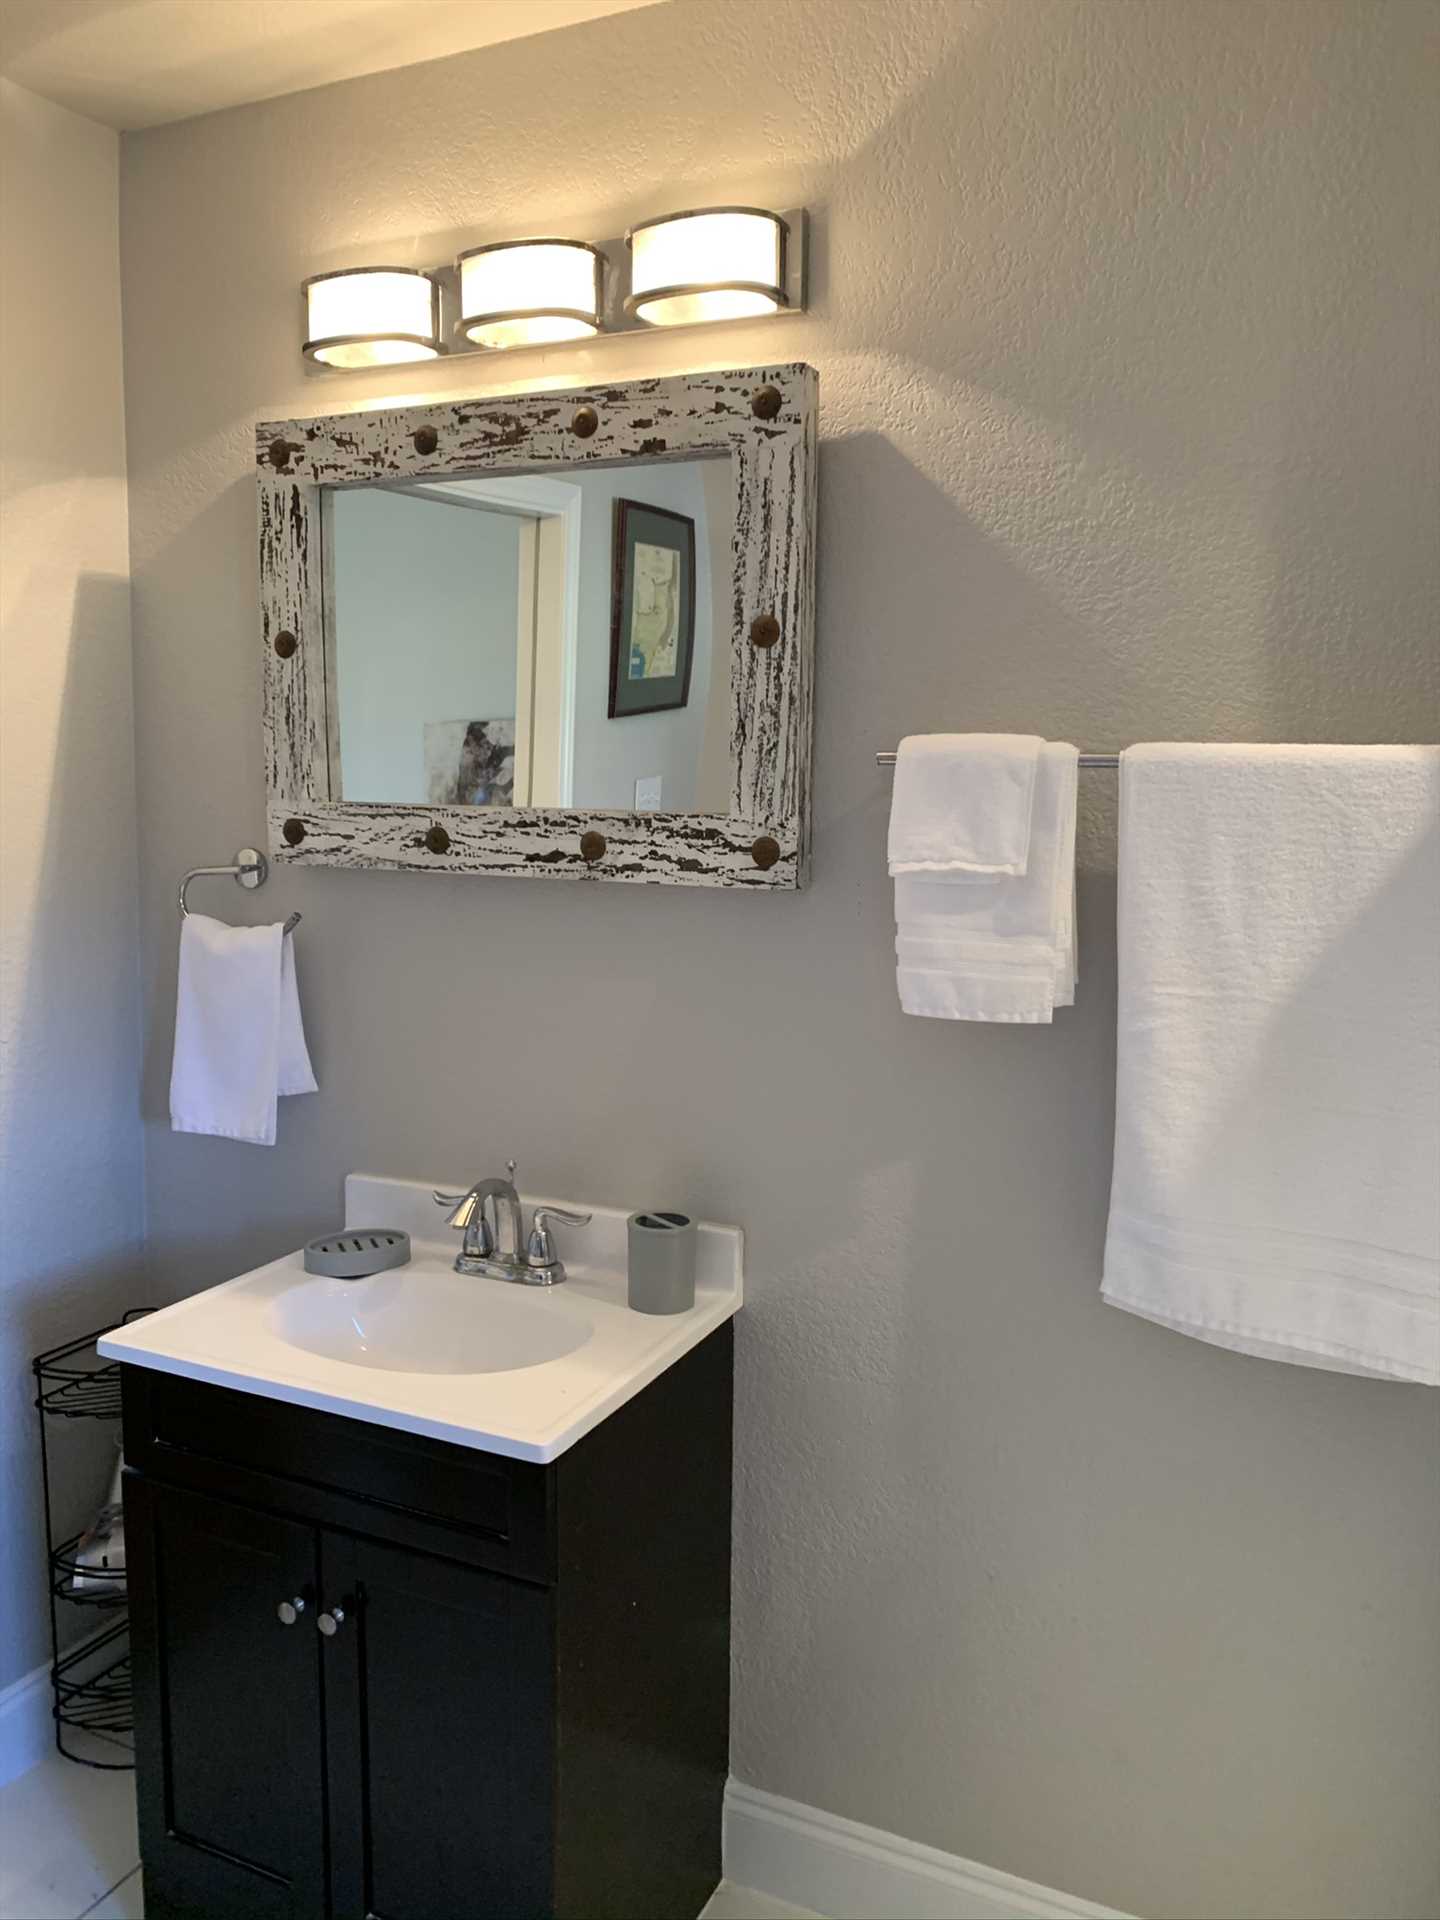                                                 Subtle but friendly decorative touches, like the ornate mirror in the bathroom, help make the Hideout a comfortable guest home for your intimate holiday.